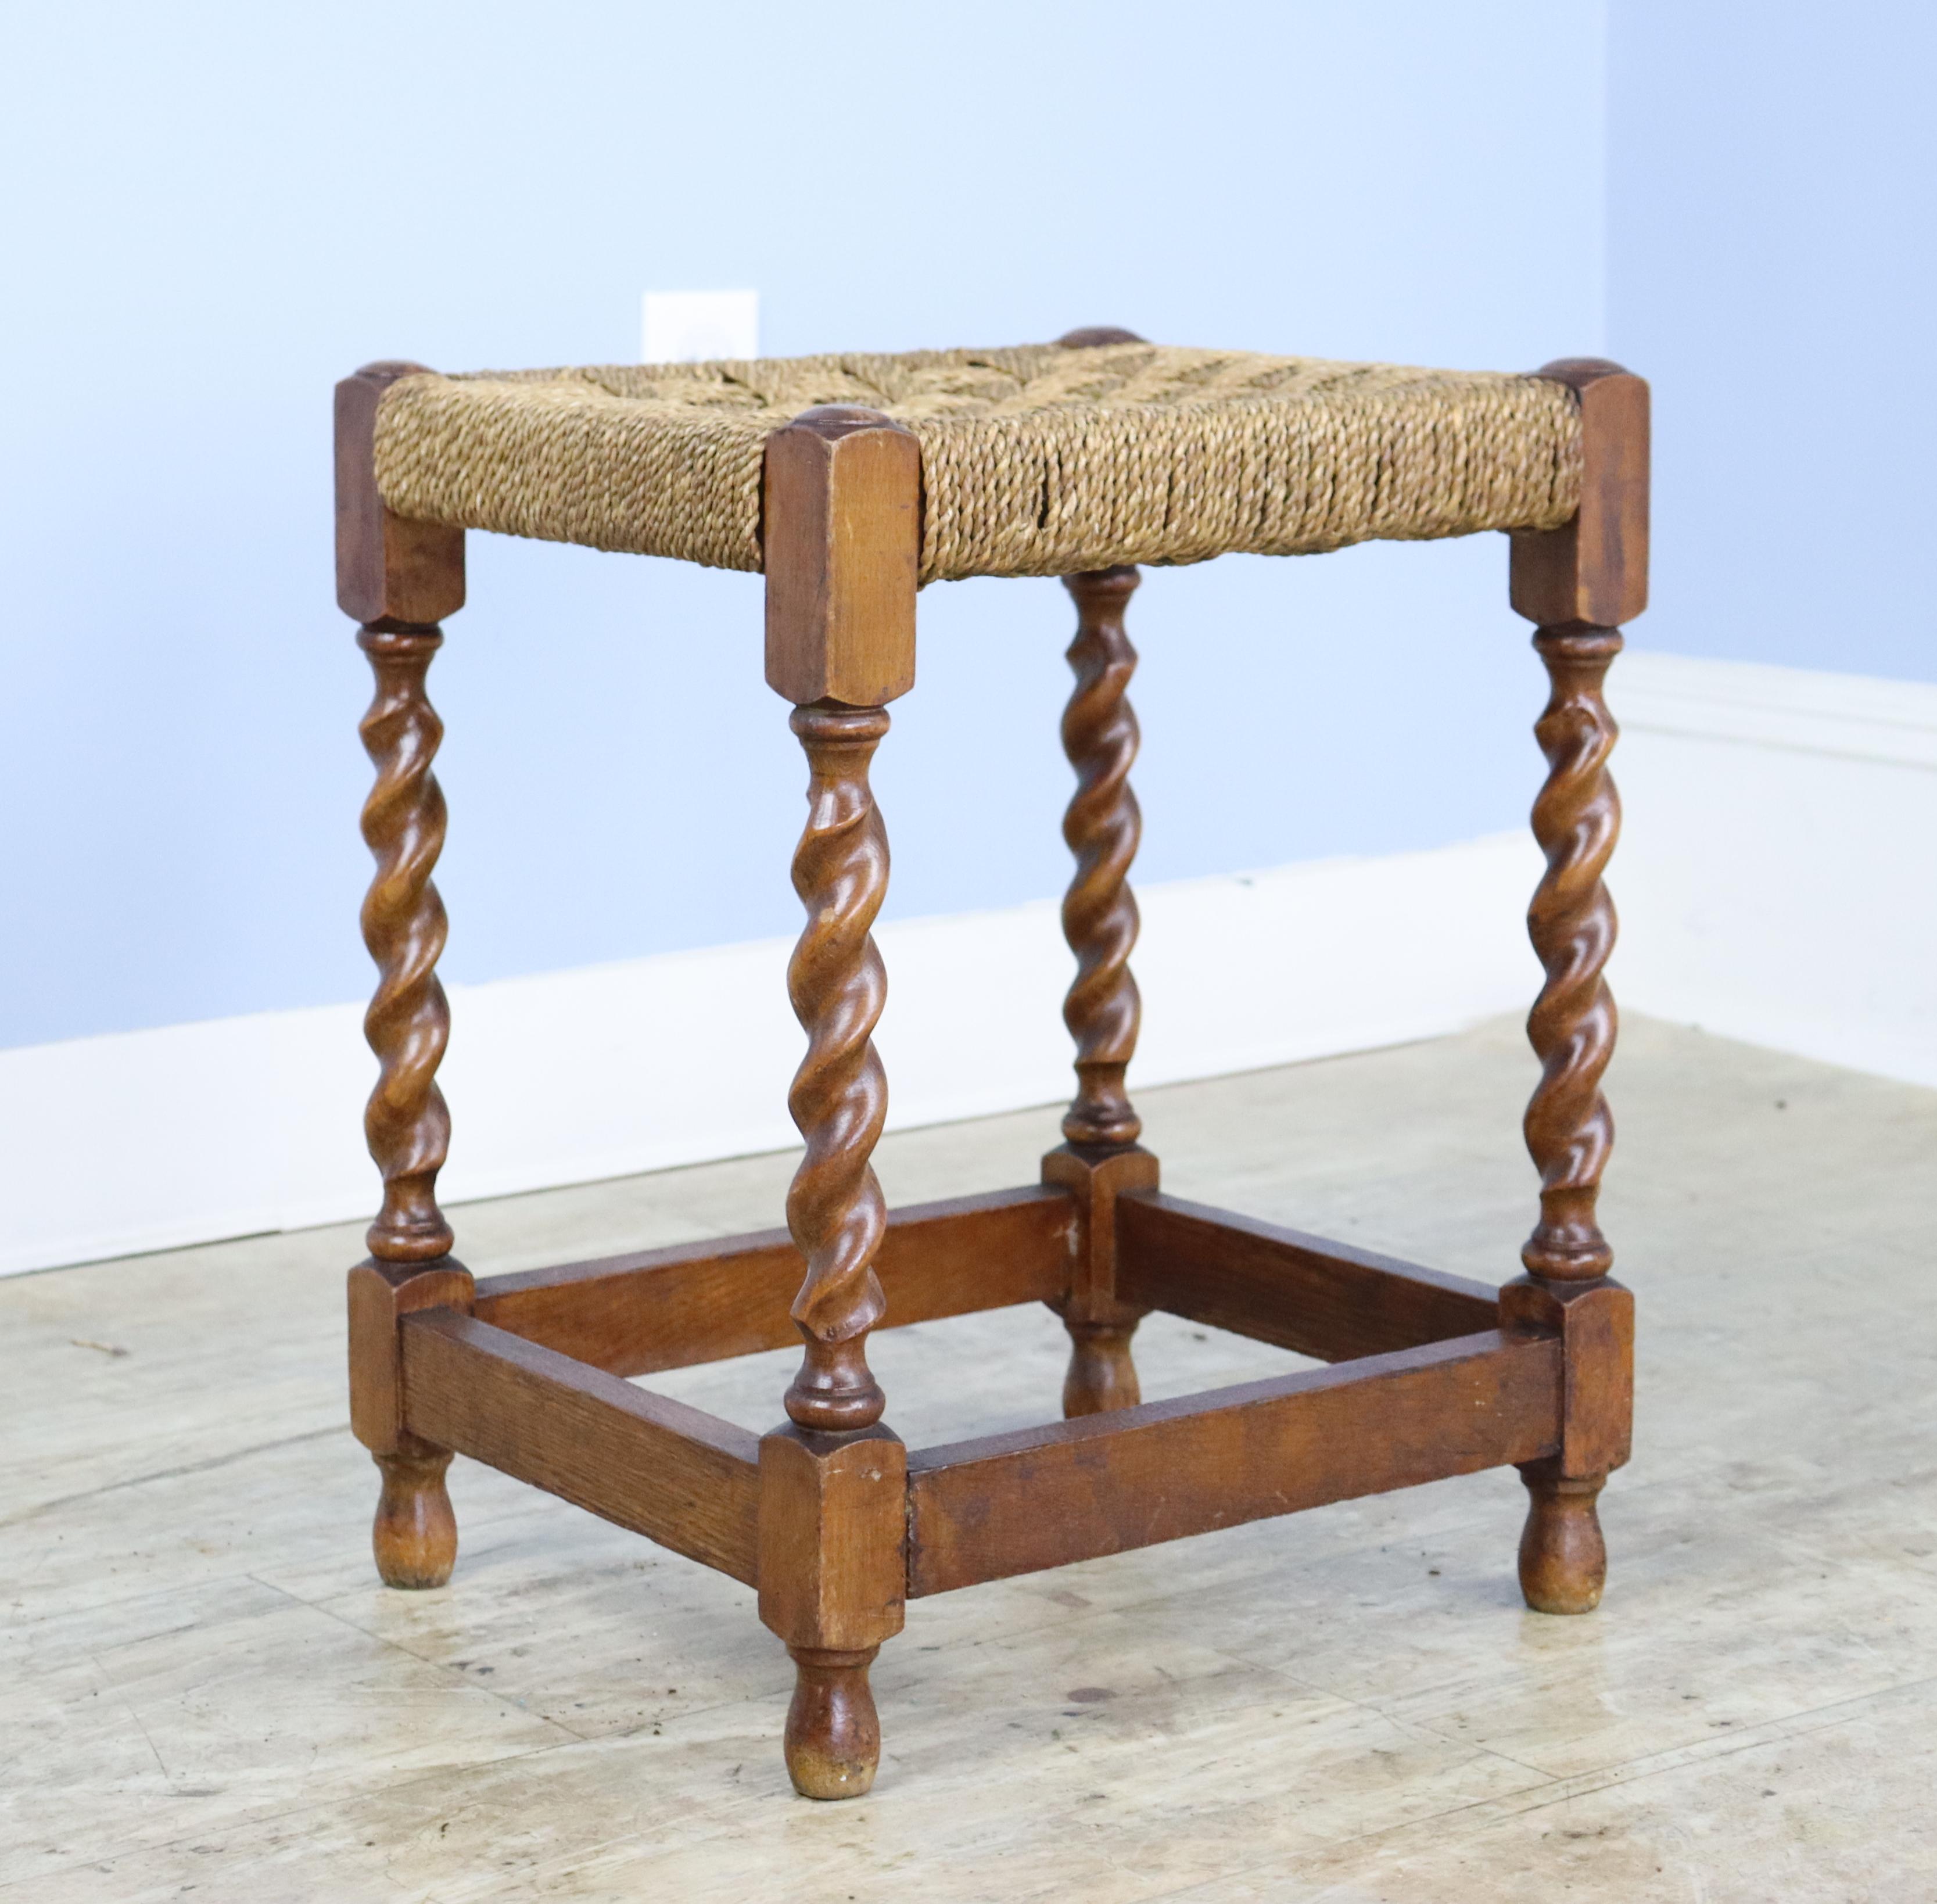 A taller version of the traditional English string stool complete with elegant patterned woven seat. Small enough to tuck away for extra seating, but so pretty it should be on display! Sturdy enough to use as a chair, pulled up to a desk or writing